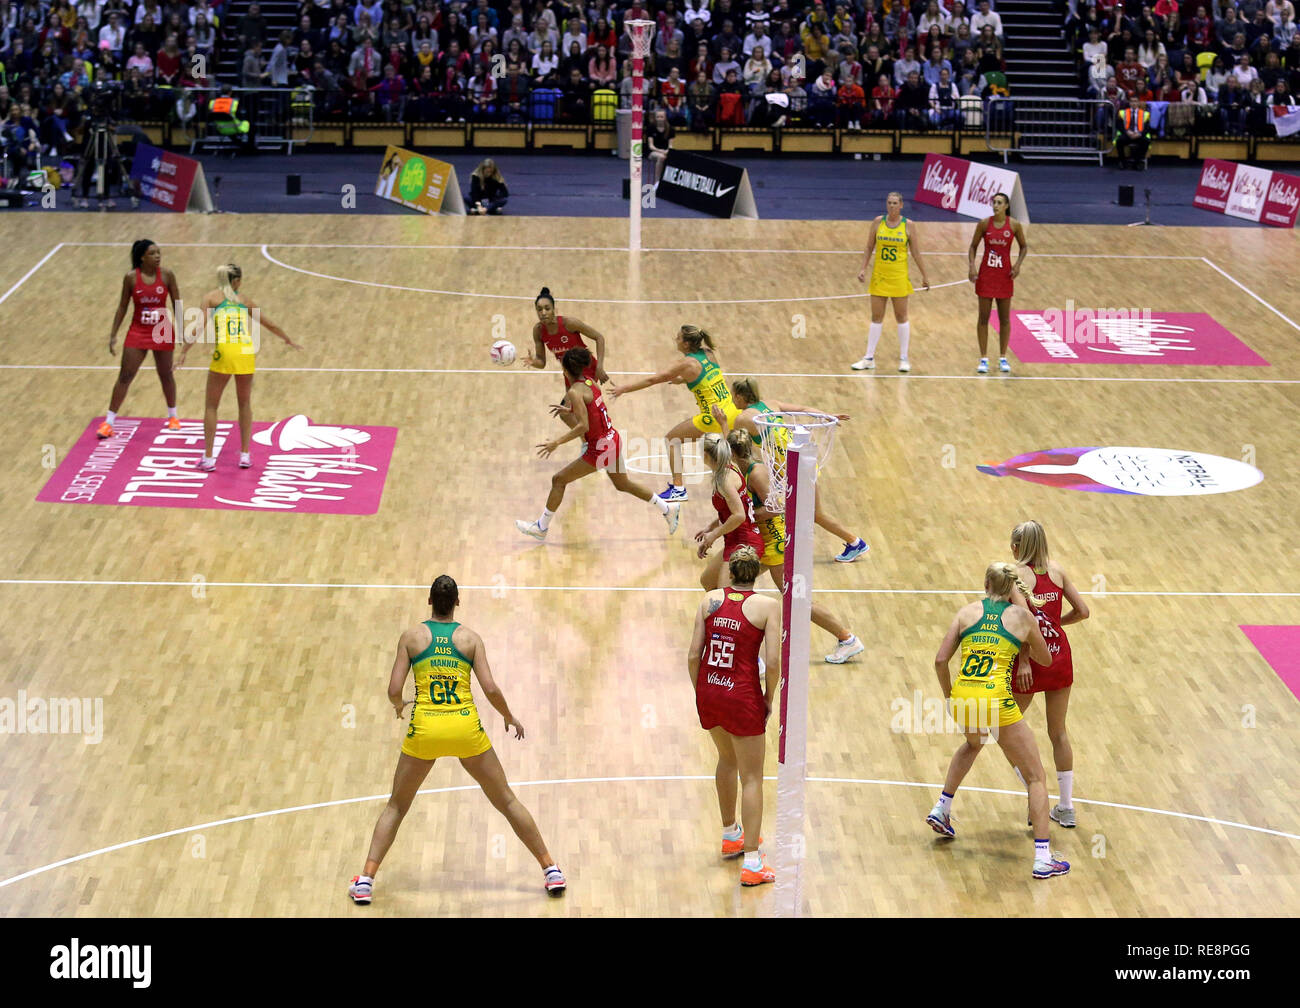 A general view of the England Vitality Roses playing the Australian Diamonds during the Vitality Netball International Series match at The Copper Box, London. Stock Photo